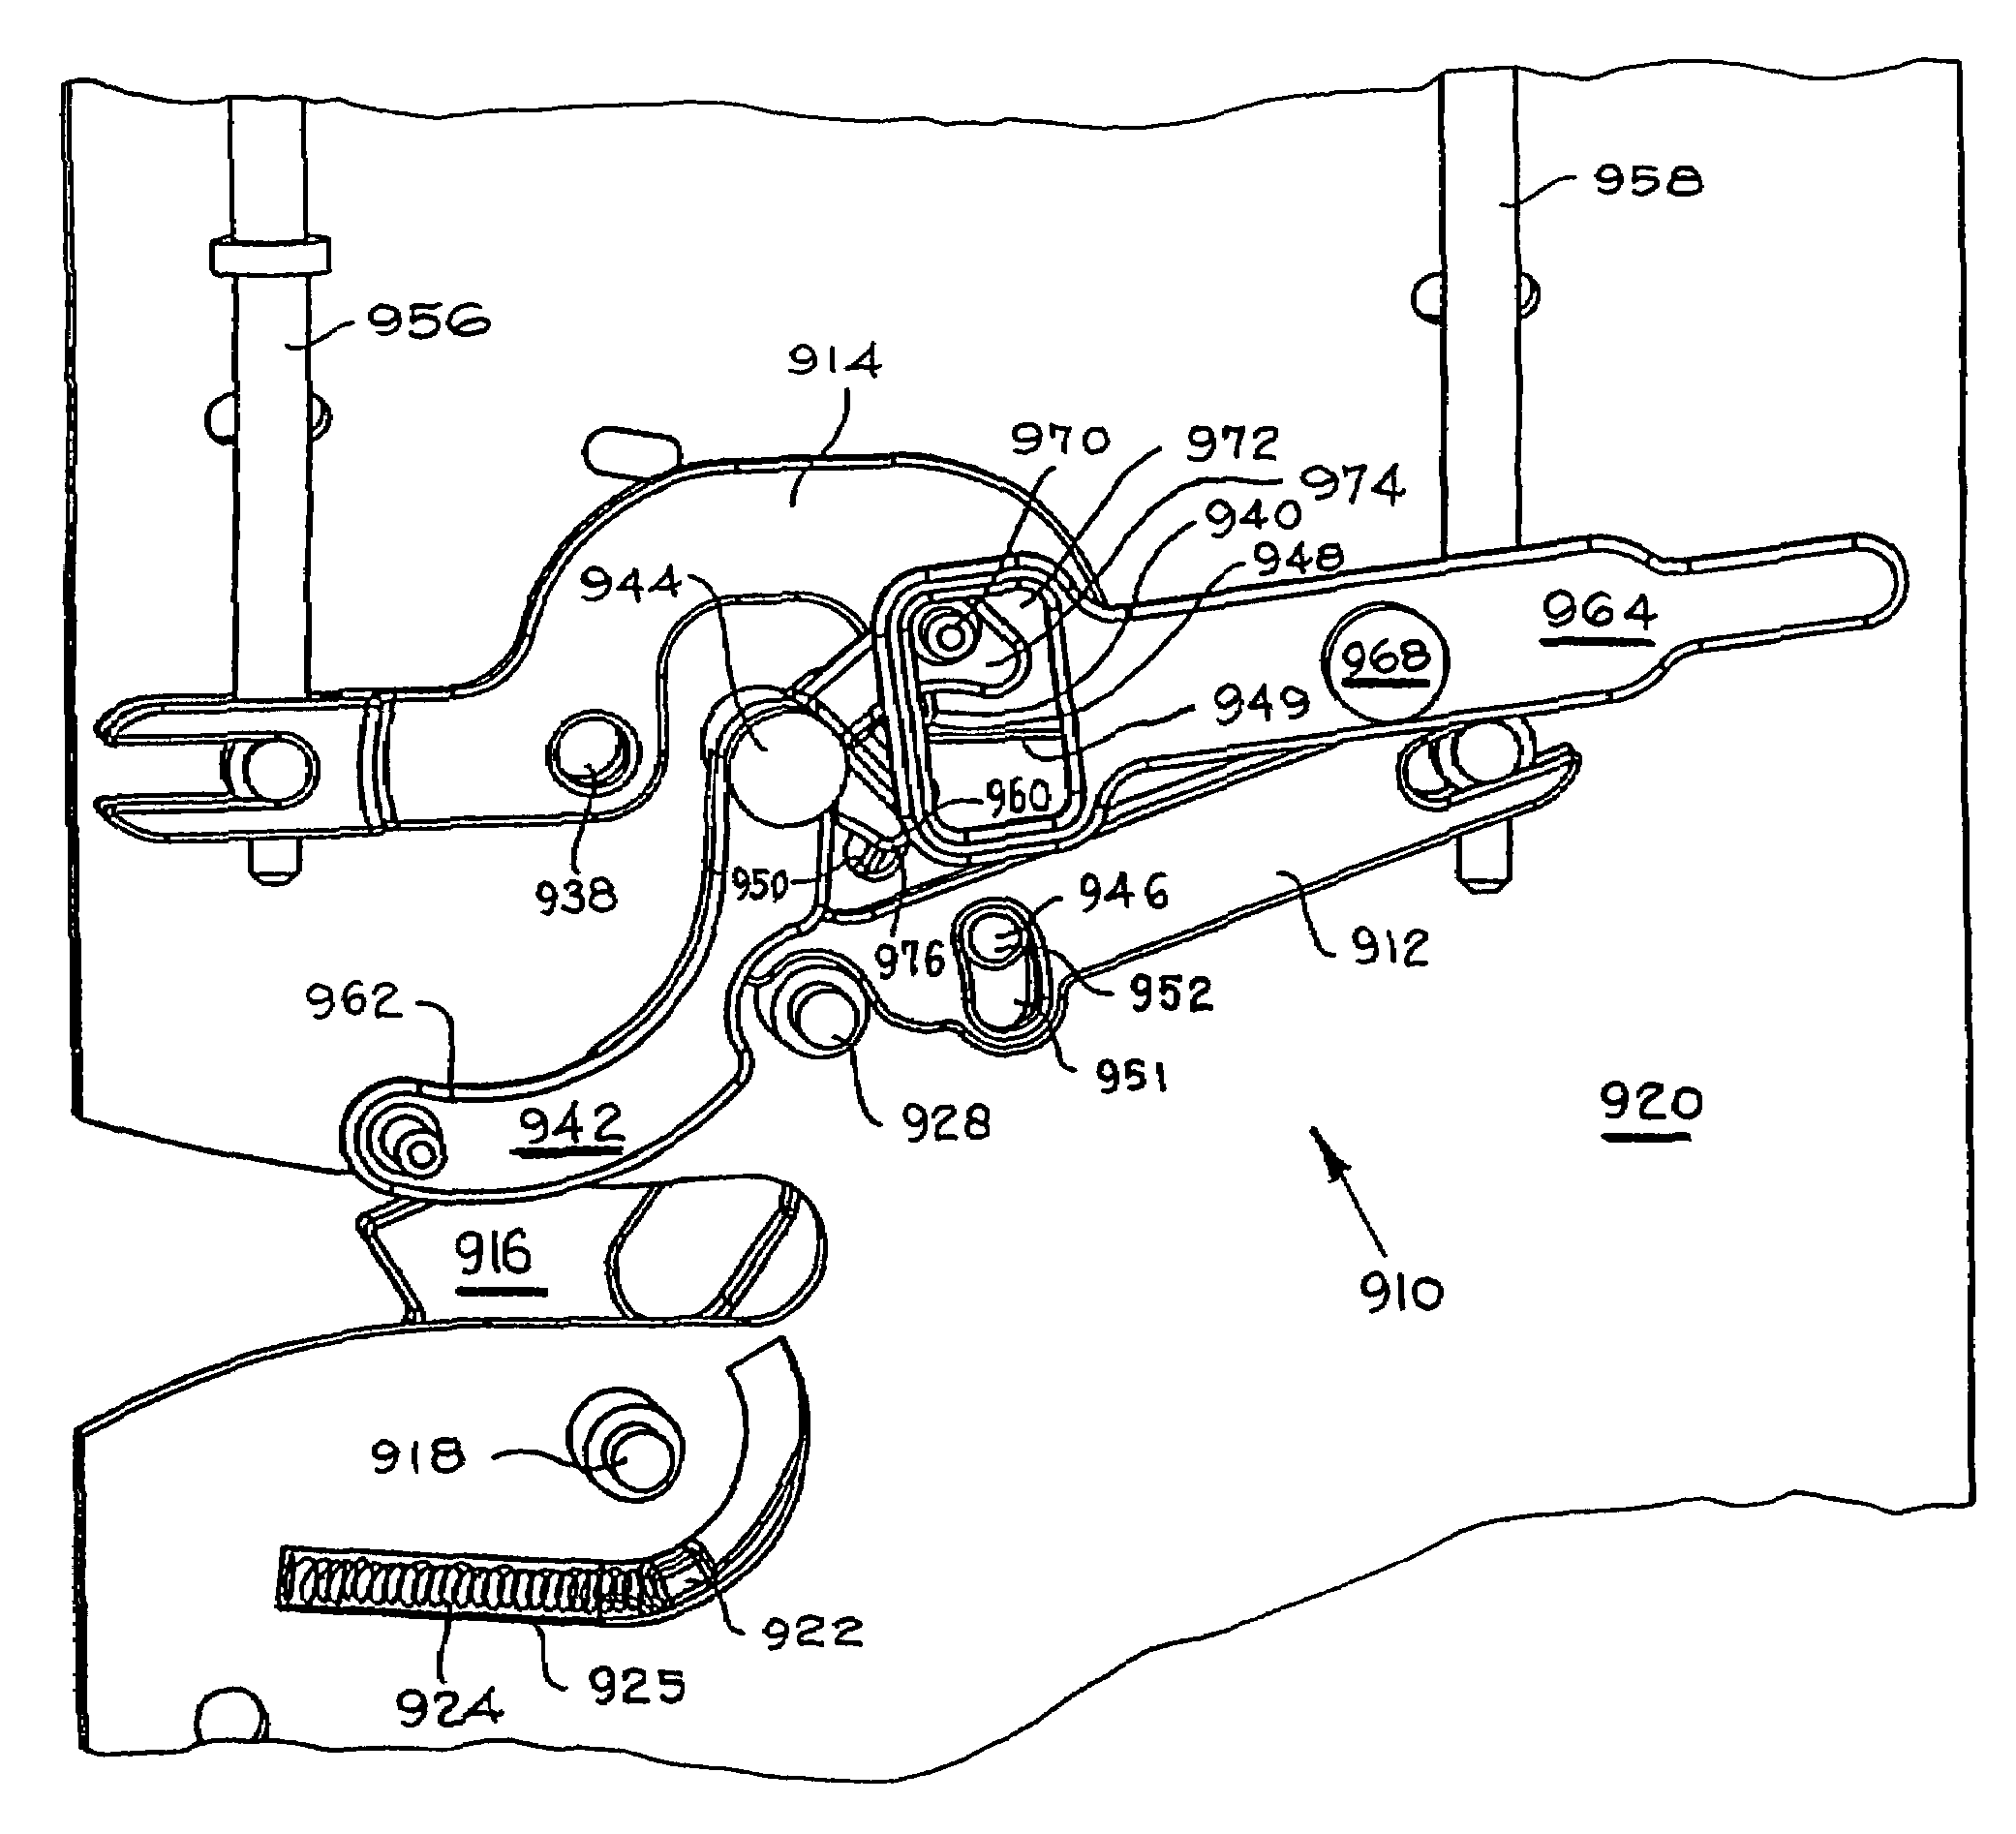 Latch apparatus and method